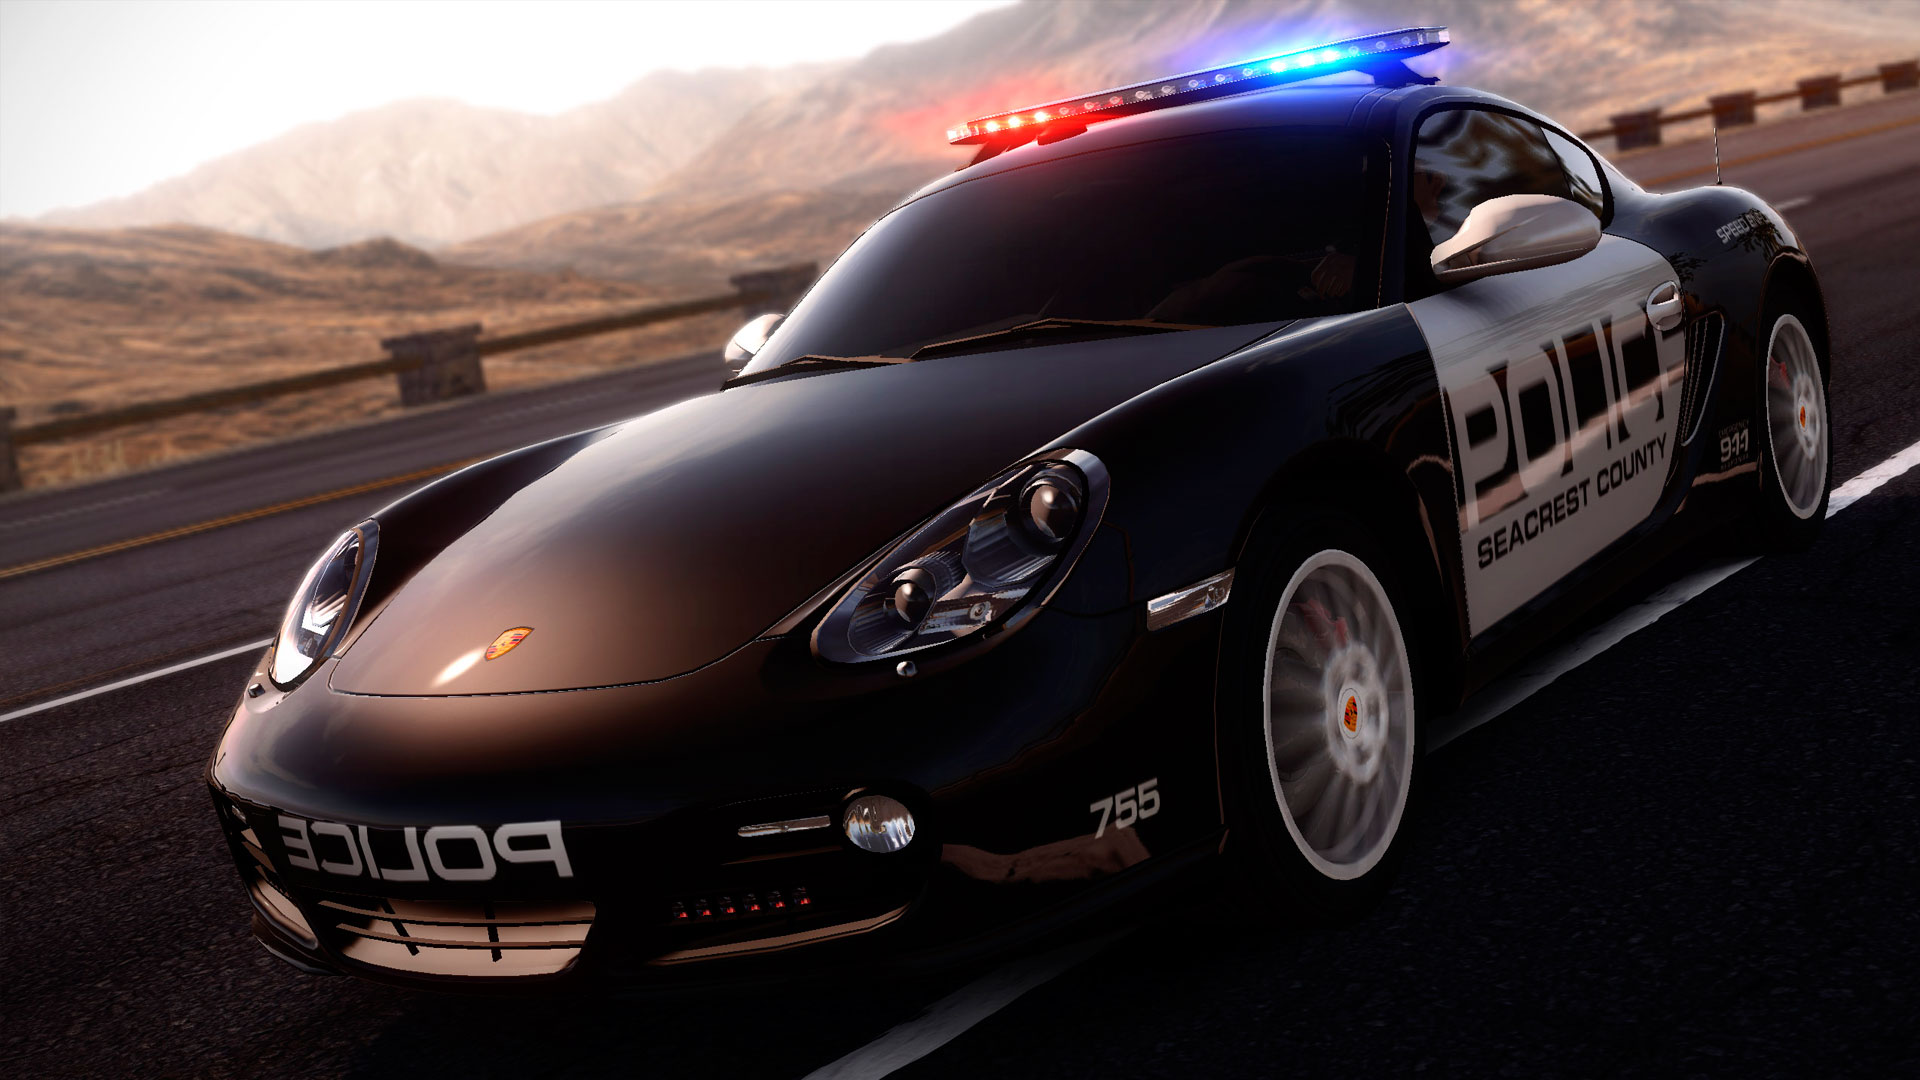 Police Car HD Cool Cars Background Pictures